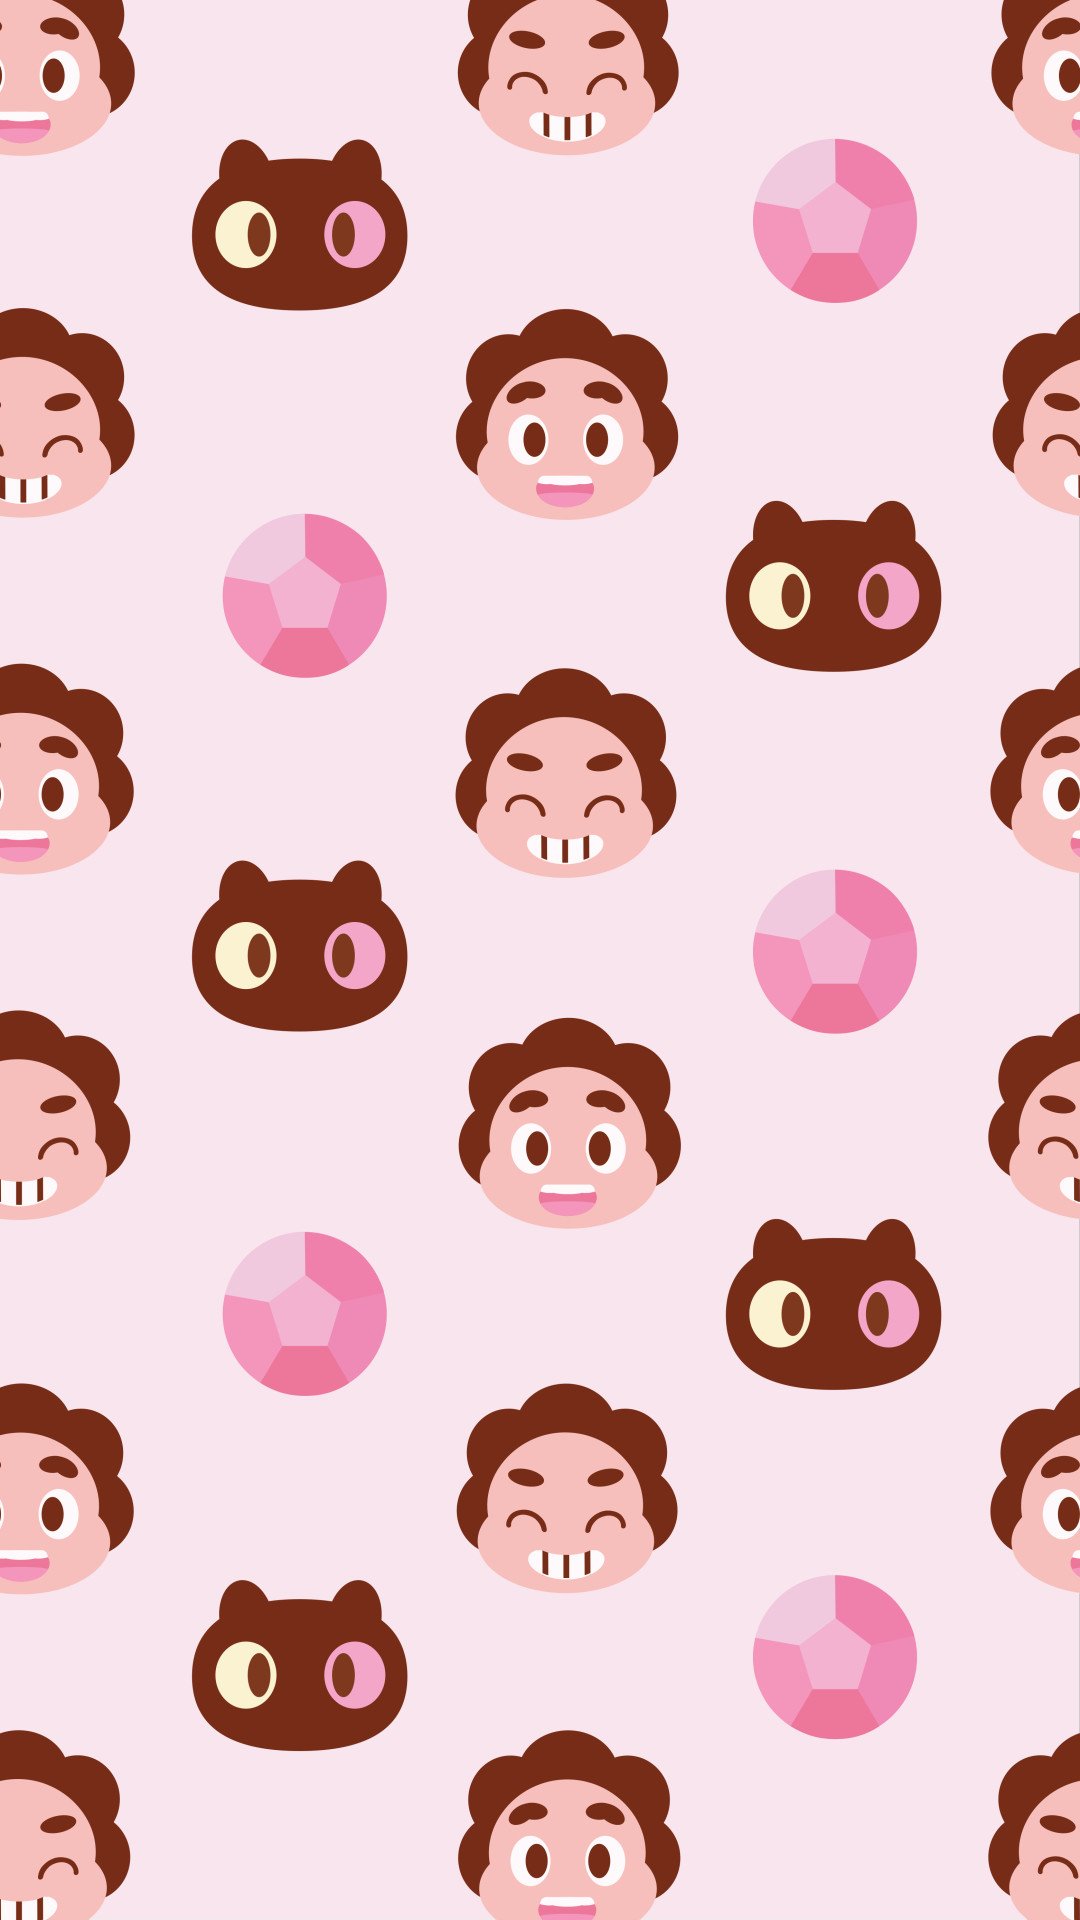 1080x1920 strawberry boy, steven wallpapers for your phone! you can get both.